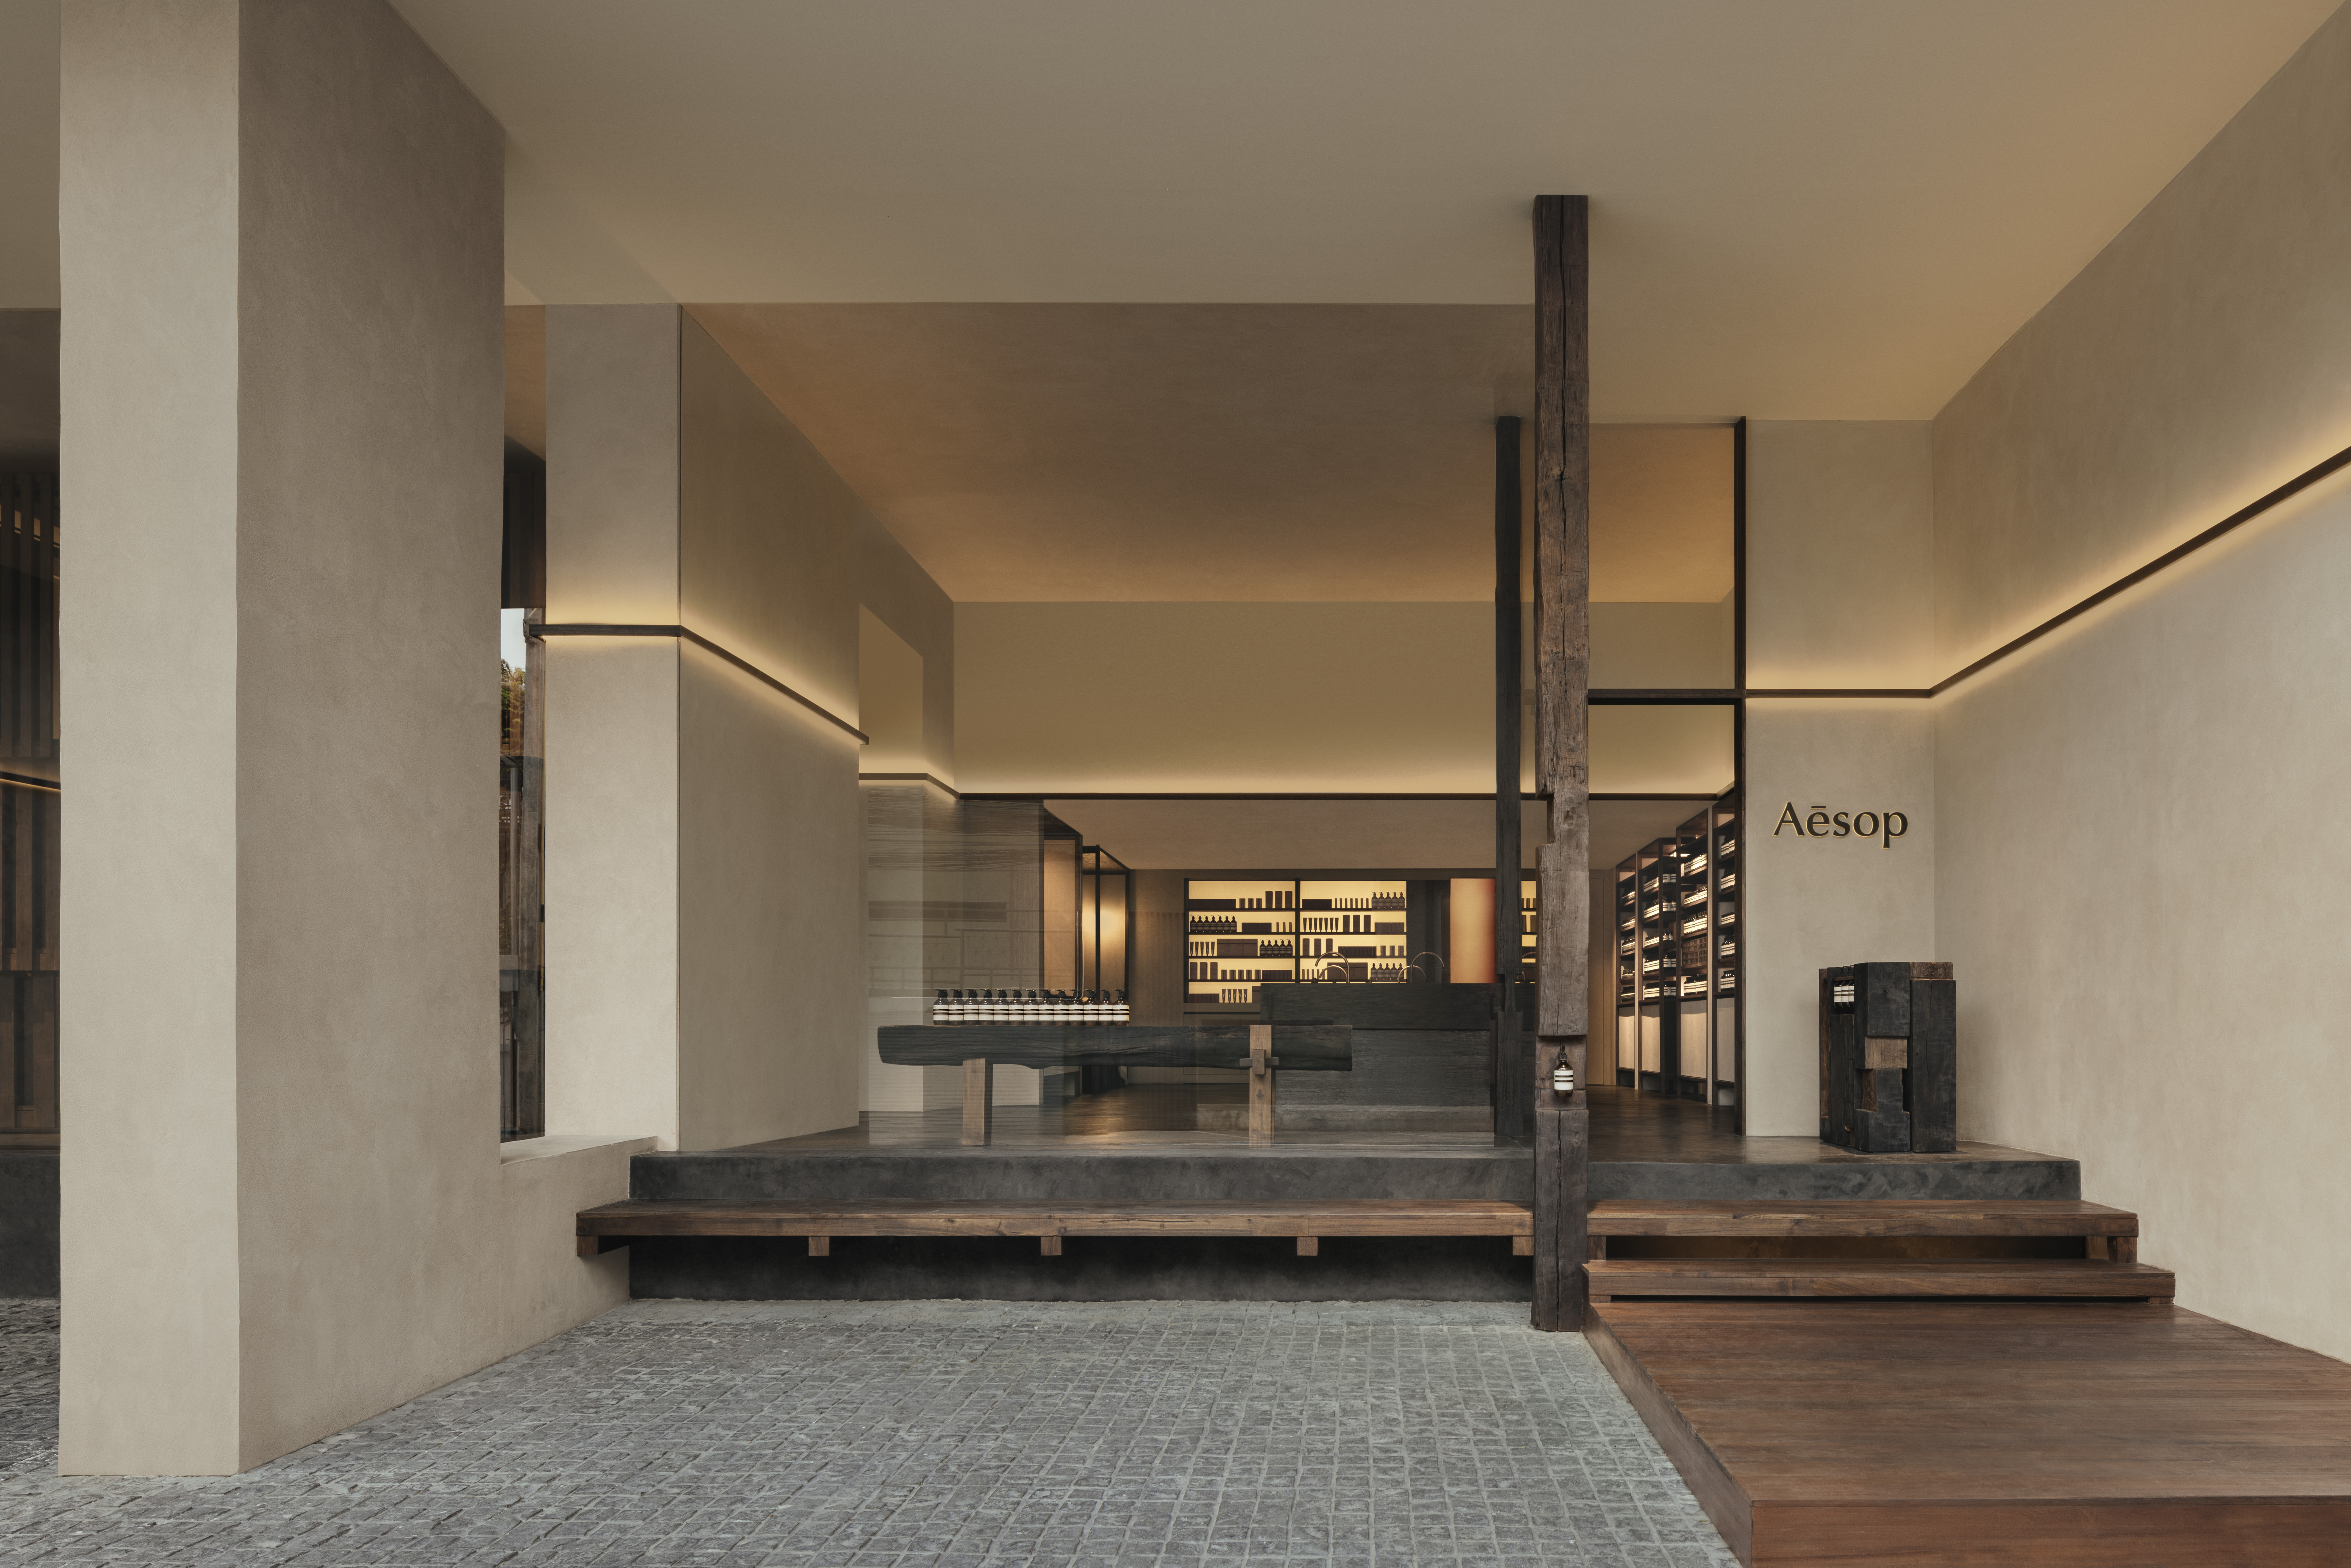 Aesop unveiled its first signature store in Thailand